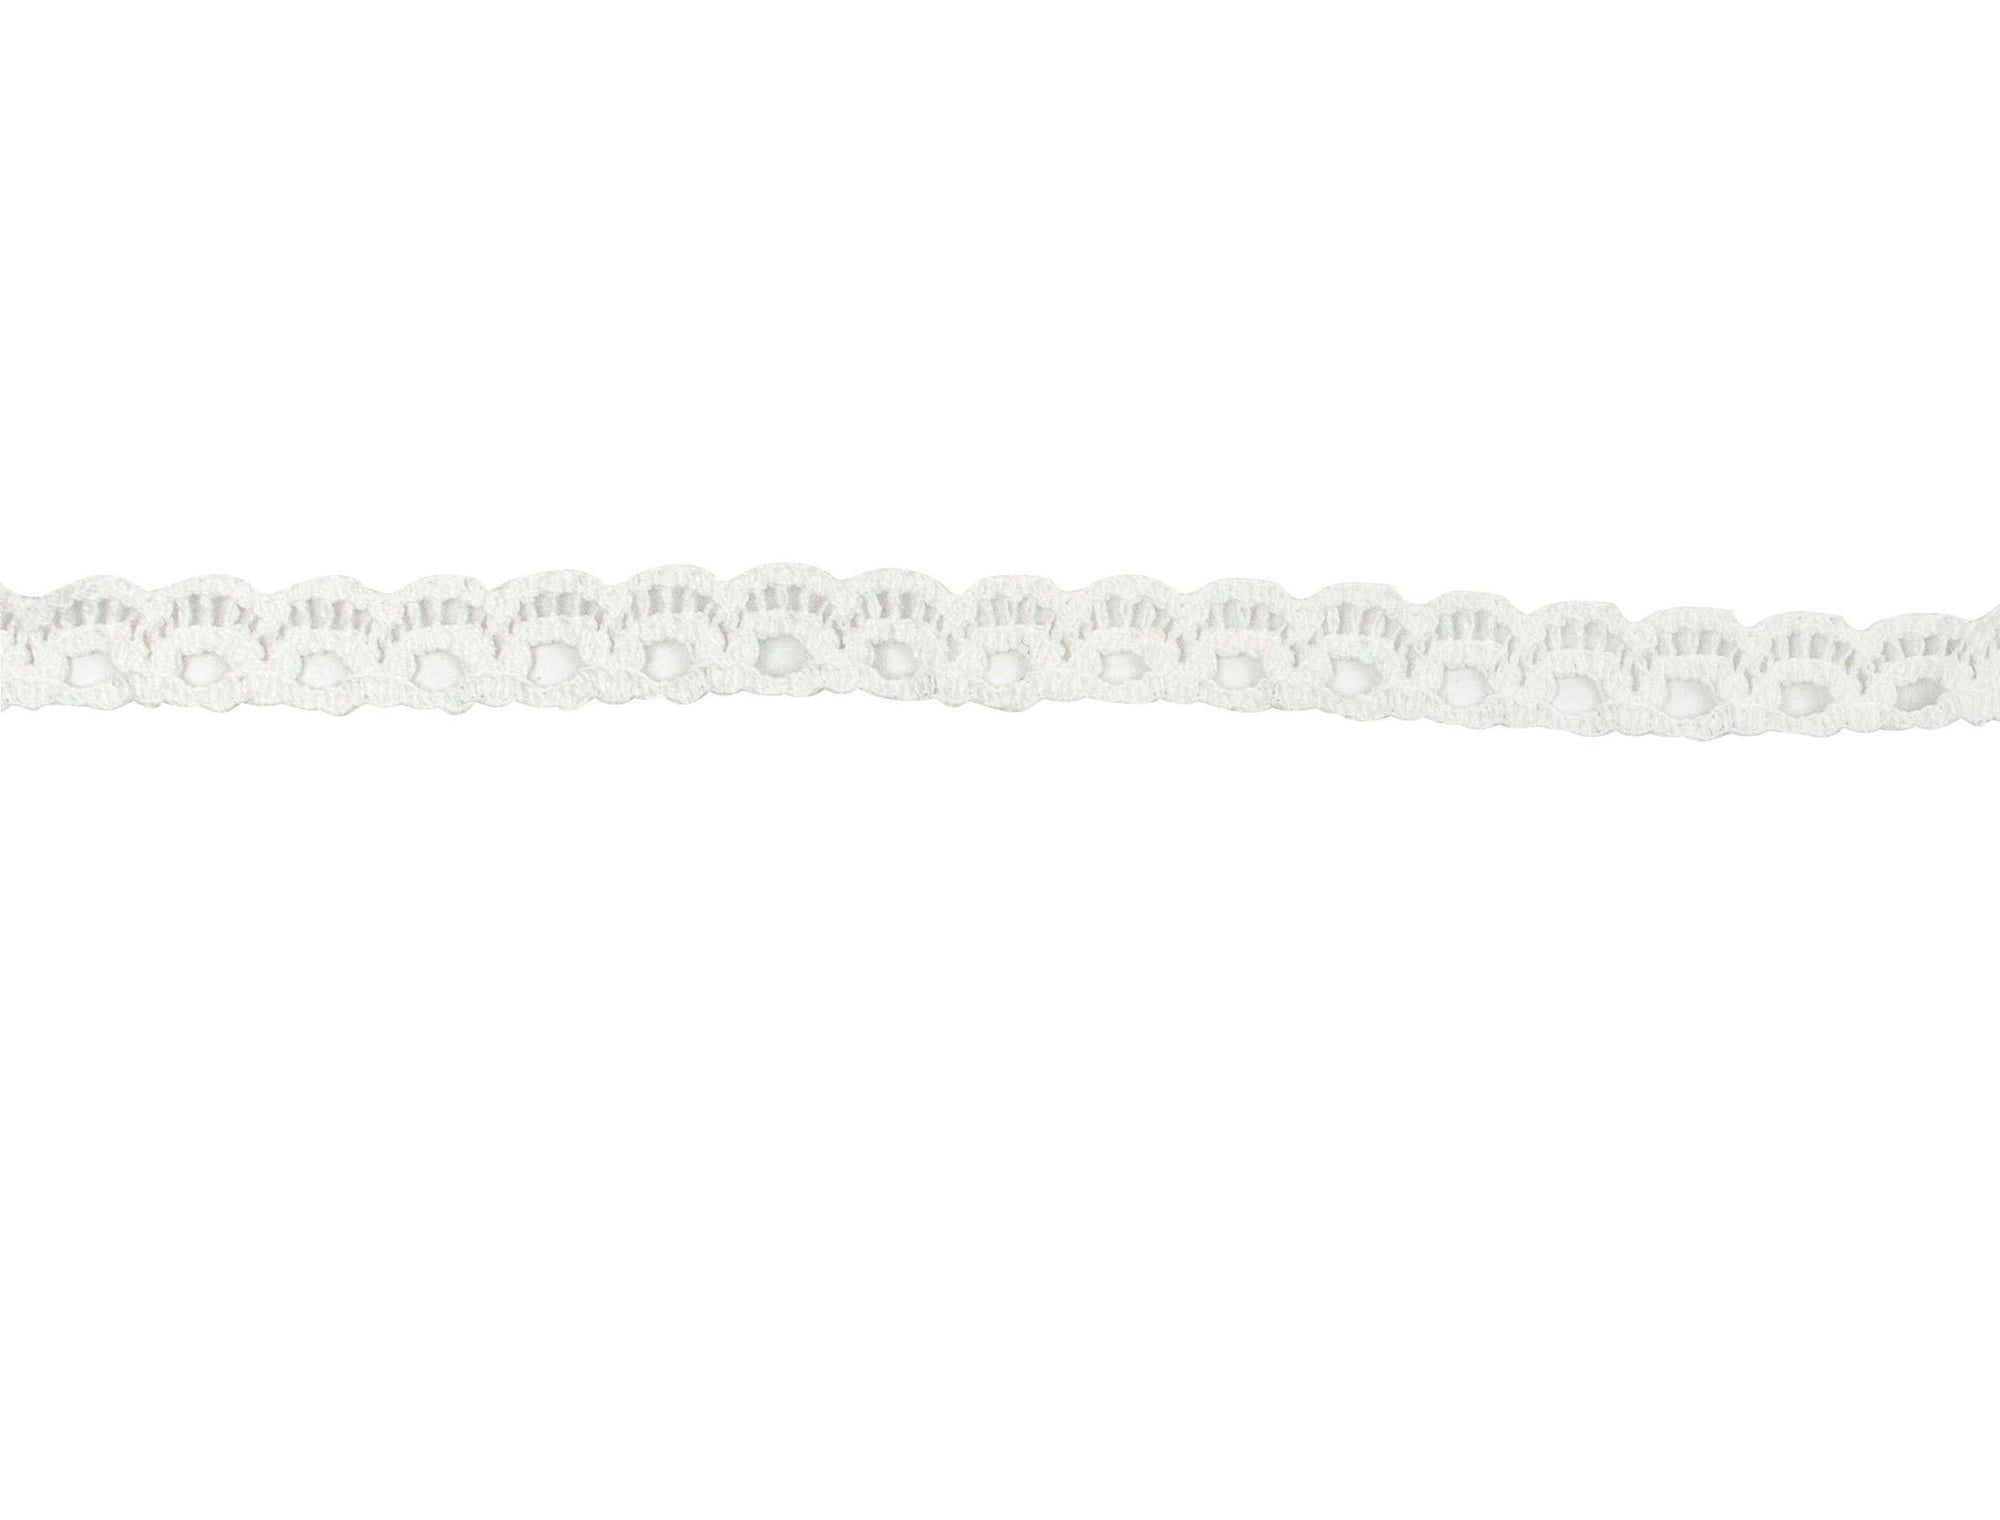 Vintage Lace Trim Ivory Scalloped 1/4" - Sold by the Yard - Humboldt Haberdashery